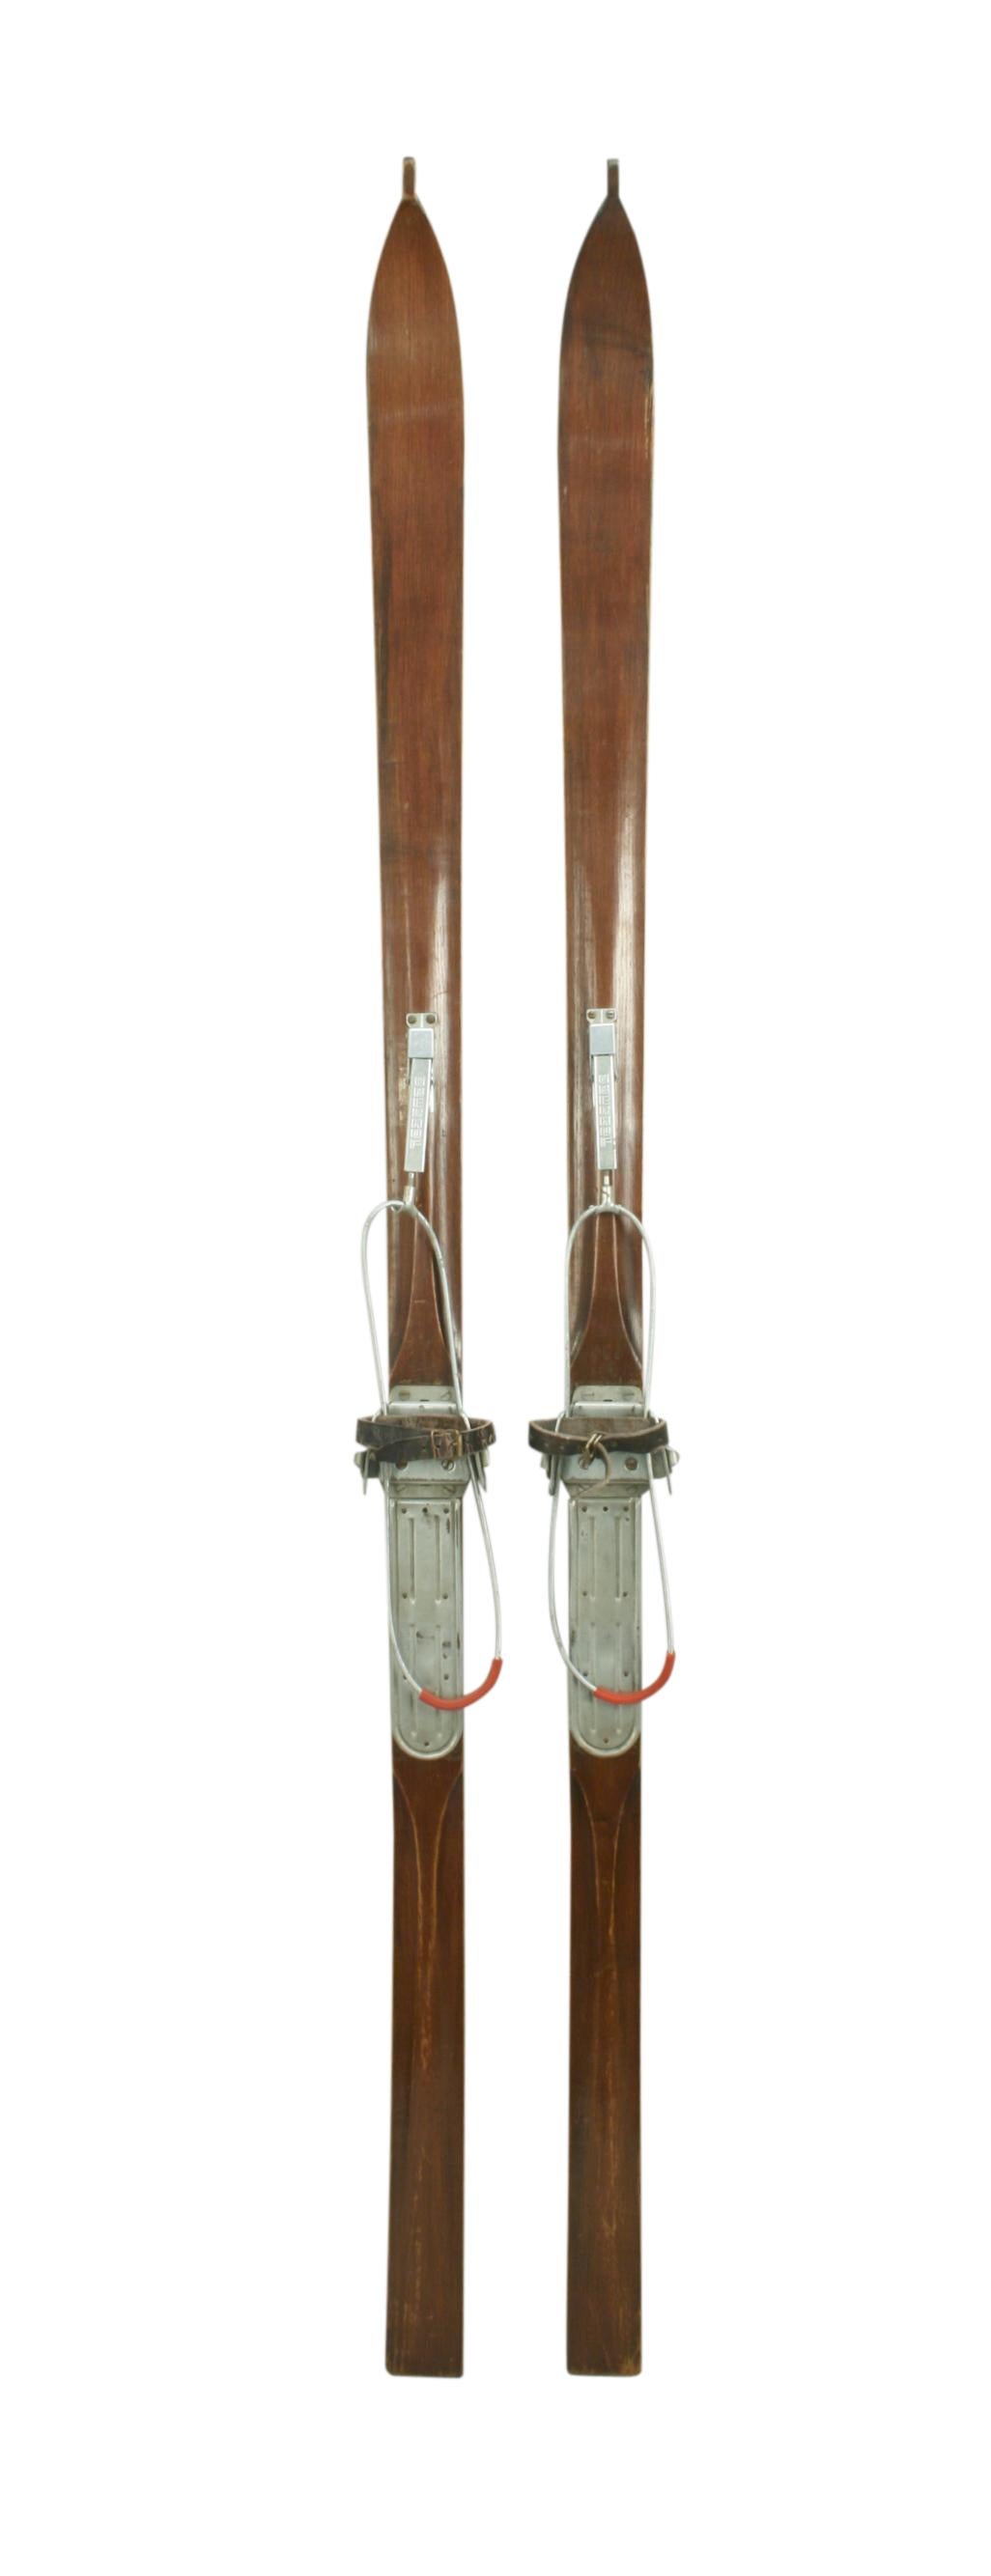 Ash ridge top skis with galvanised toe irons and foot plates, leather foot straps and and cable bindings. The skis are with pointed tips, dark brown in colour with a polished finish and the running surface having a single groove along its length.